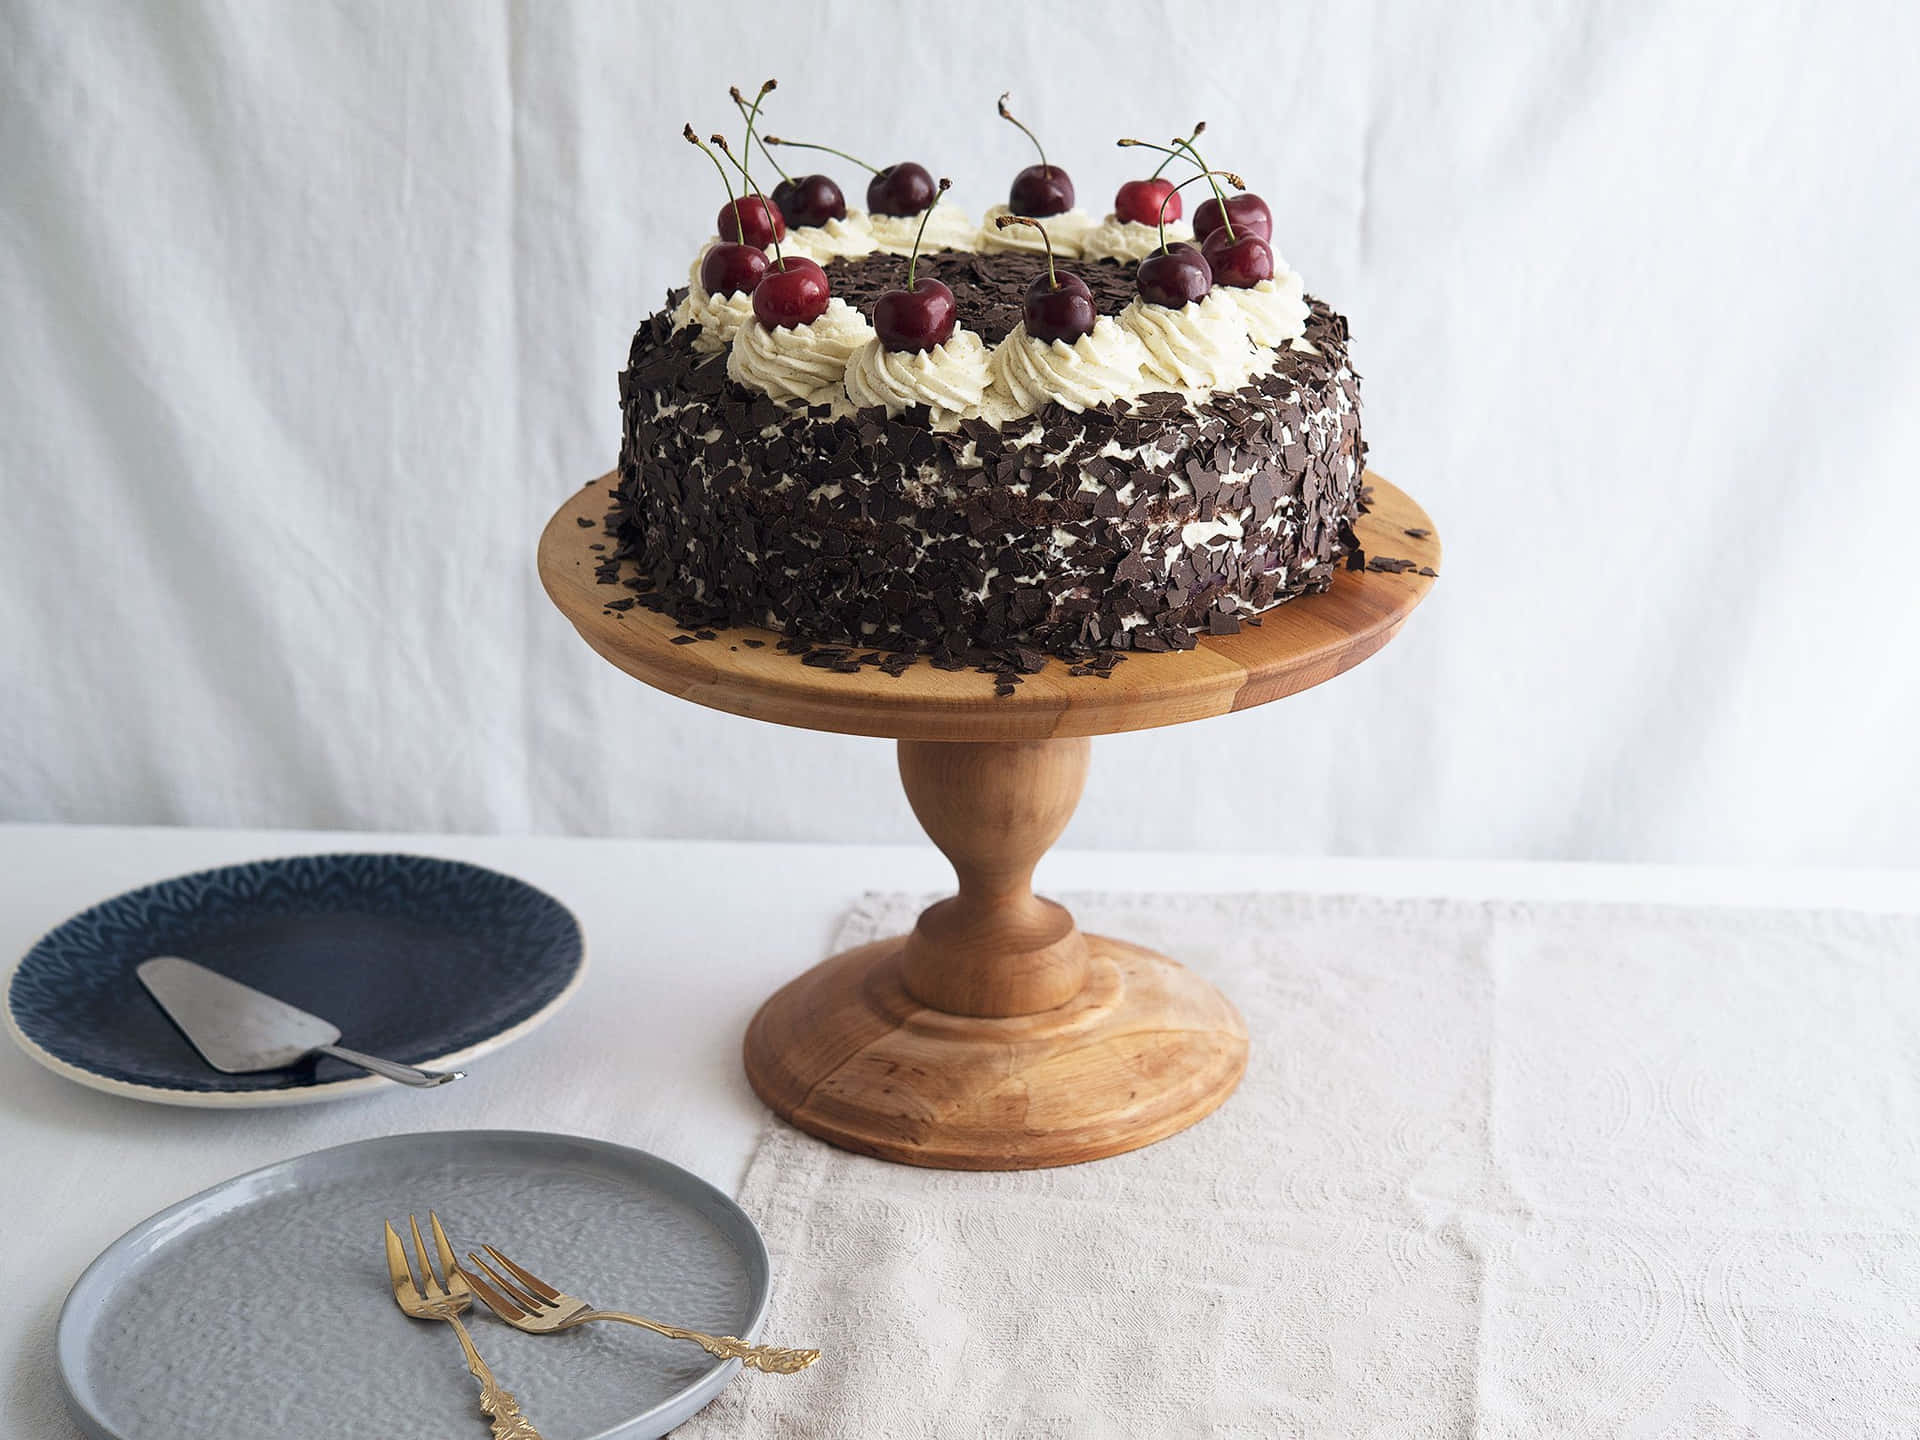 Enjoy a delicious slice of decadent Black Forest Cake Wallpaper